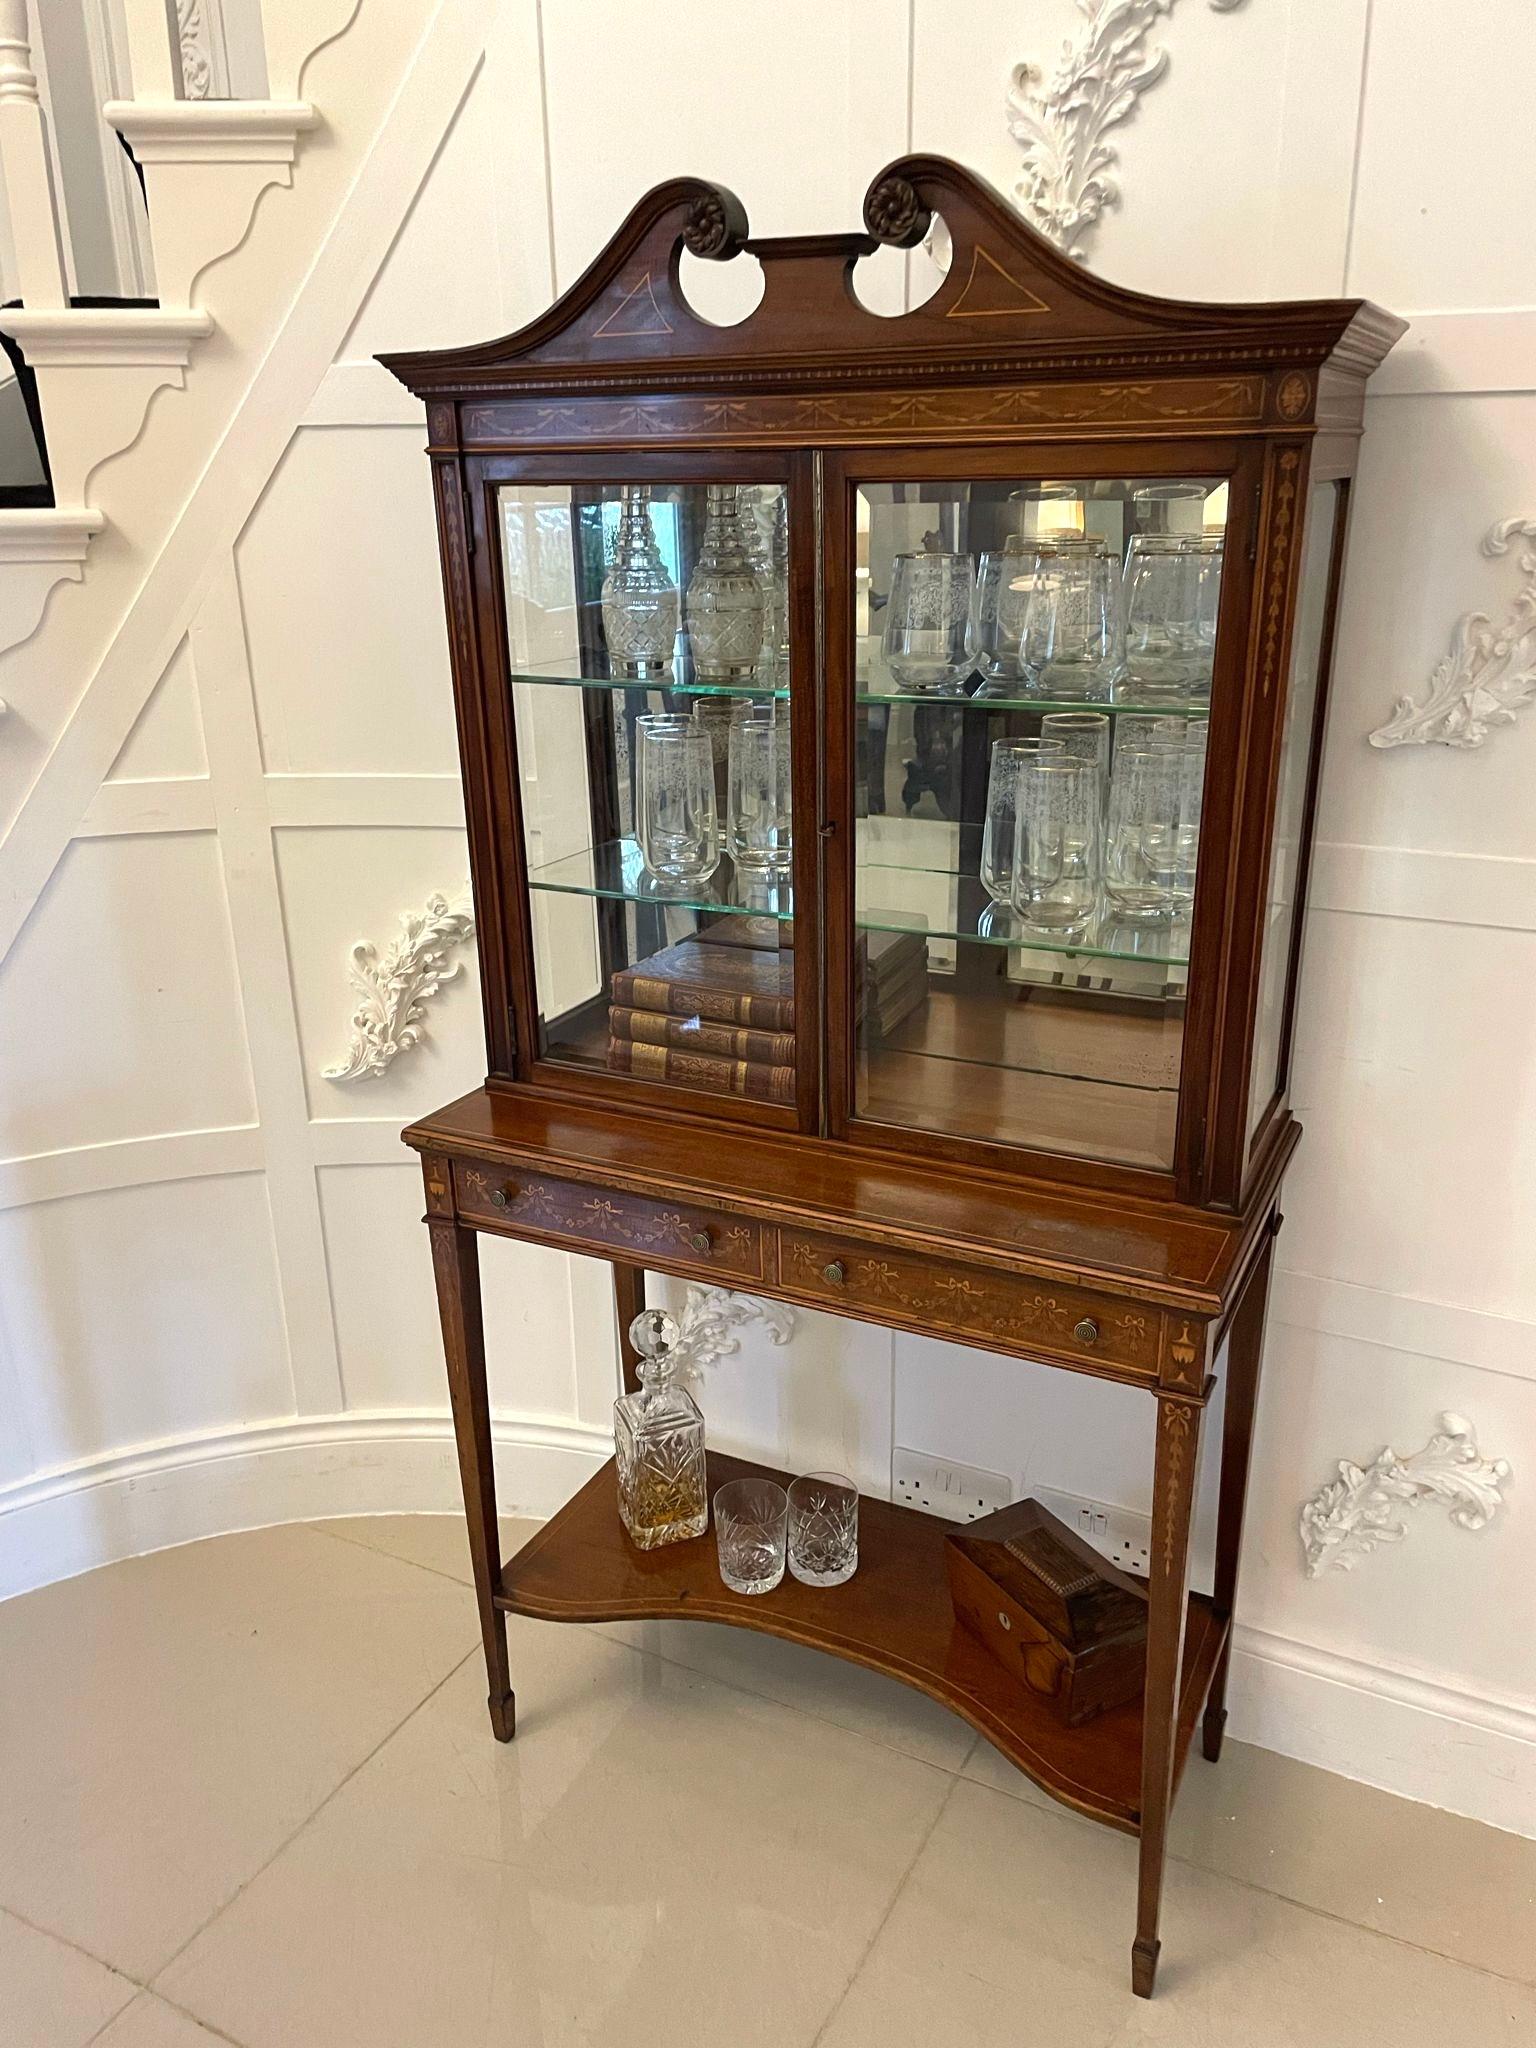 Outstanding quality antique Victorian mahogany inlaid display cabinet having a quality carved and inlaid swan neck pediment above a mahogany frieze inlaid with pretty swags, bows and ribbons above a pair of bevelled edge glazed doors opening to